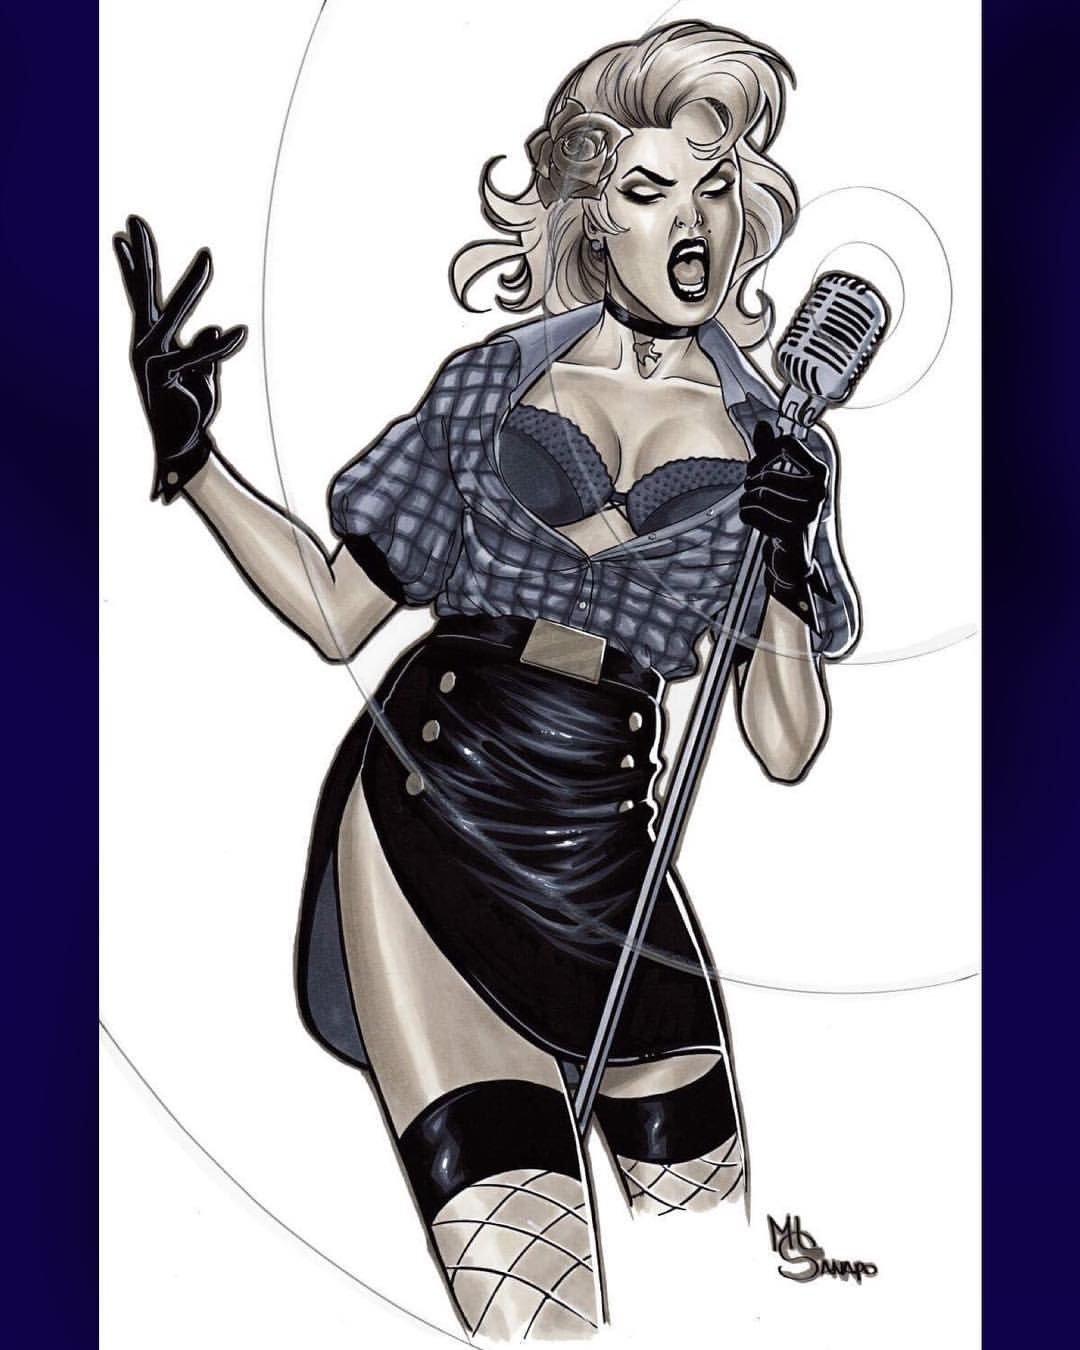 Watch the Photo by Justanotherguy with the username @Justanotherguy79, posted on October 2, 2018 and the text says 'mlsanapo:

And here you are the finished piece! 
Black Canary Bombshell commission ❤️
(11x17 ink and copic) 
The commission lists for LGS &amp; Comic'Gone 2018 (Lyon), @newyorkcomiccon 2018, @ice_comic_con ( Brighton) are still open! ❤️ Info at:..'